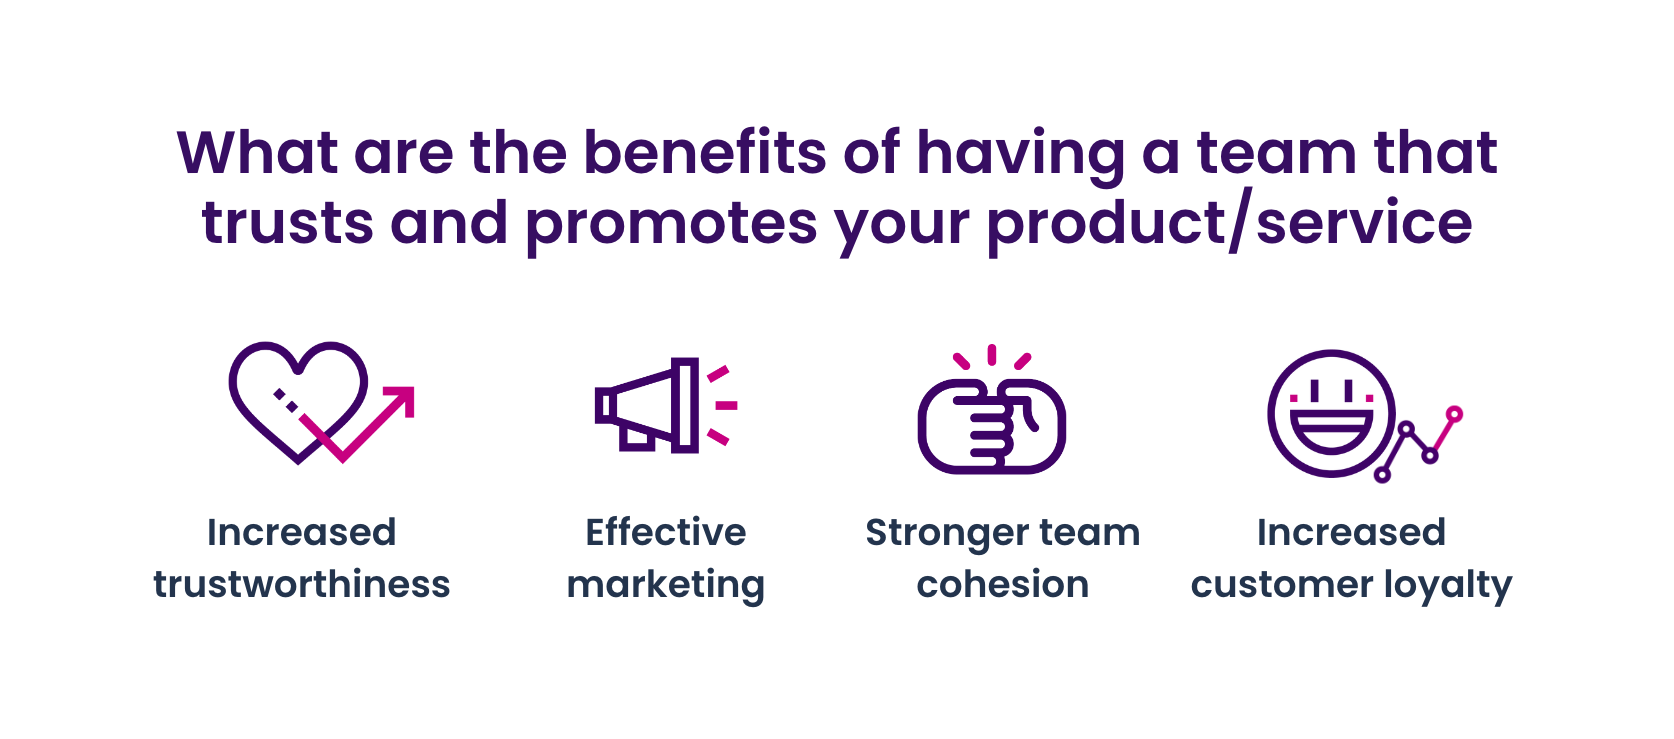 What are the benefits of having a team that trusts and promotes your product